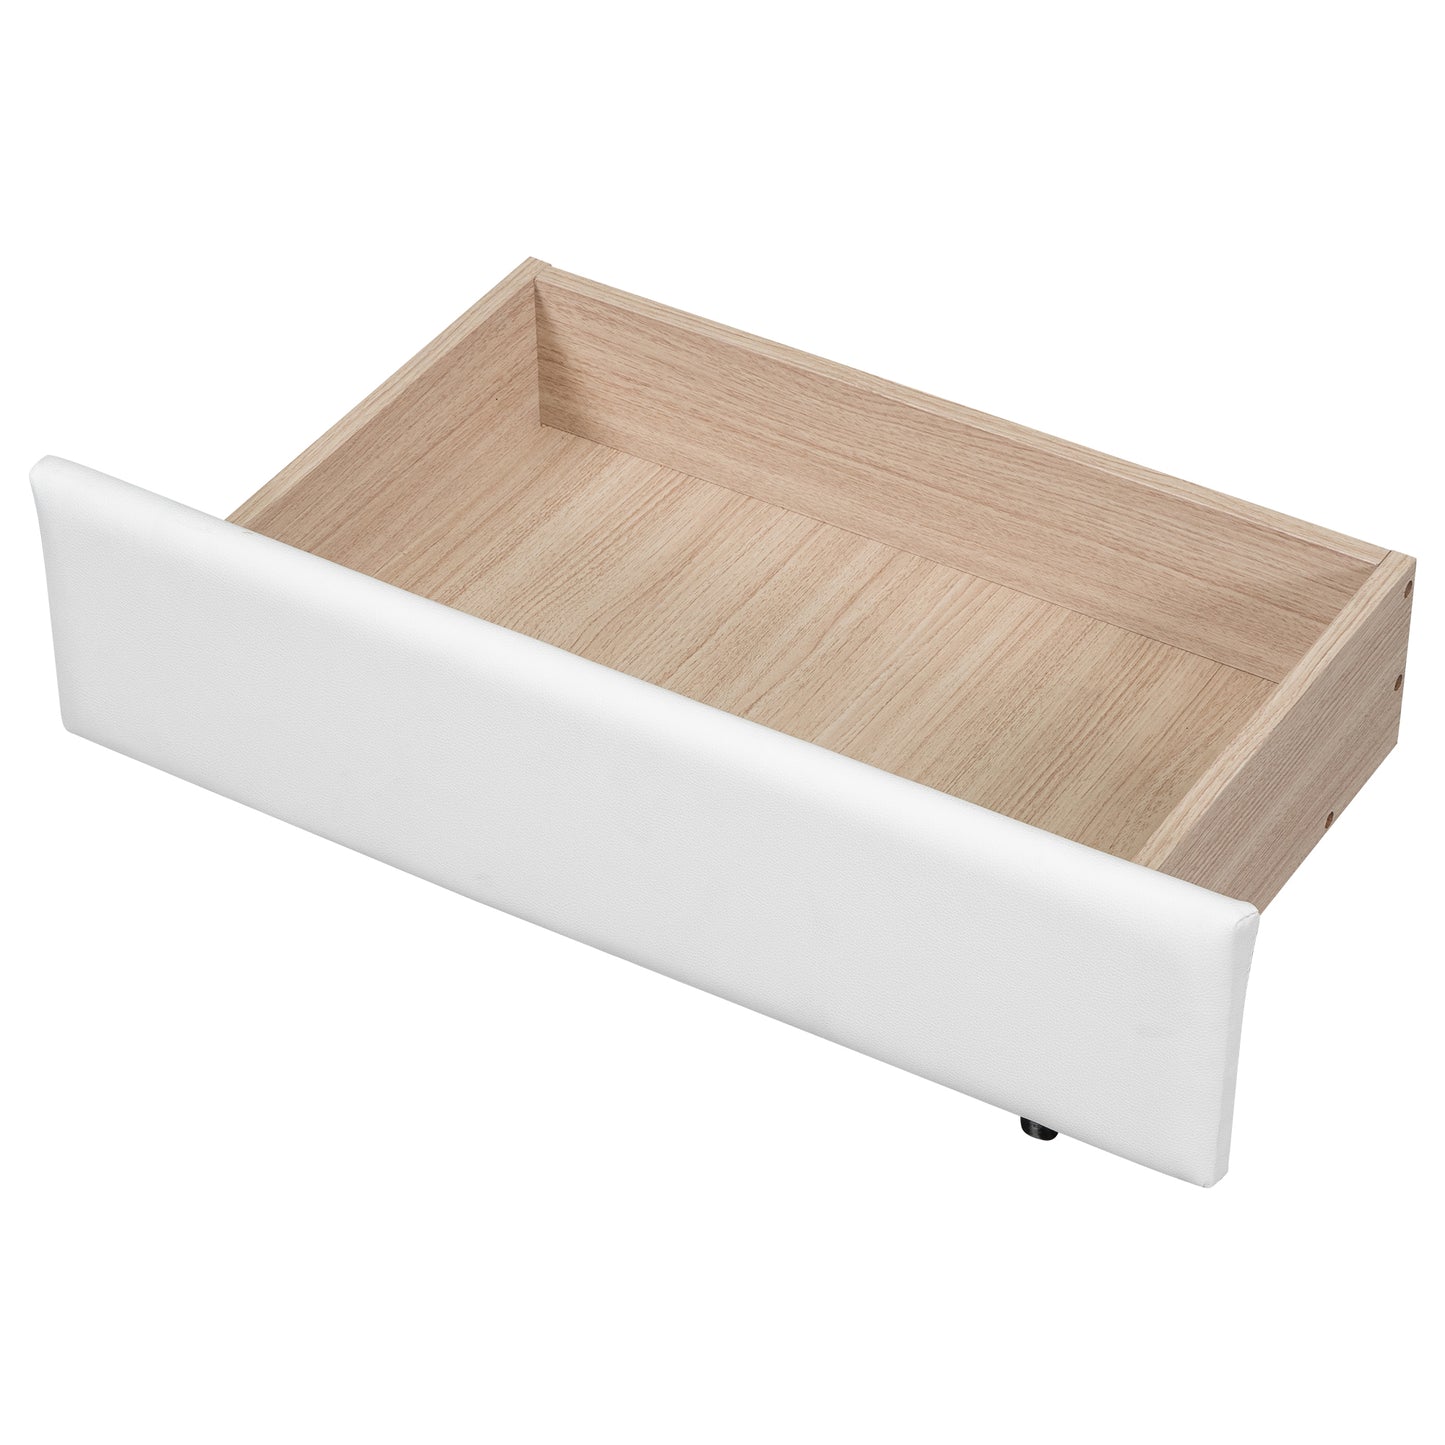 Queen Size Upholstered Platform Bed with Seashell Shaped Headboard, LED and 2 Drawers, White